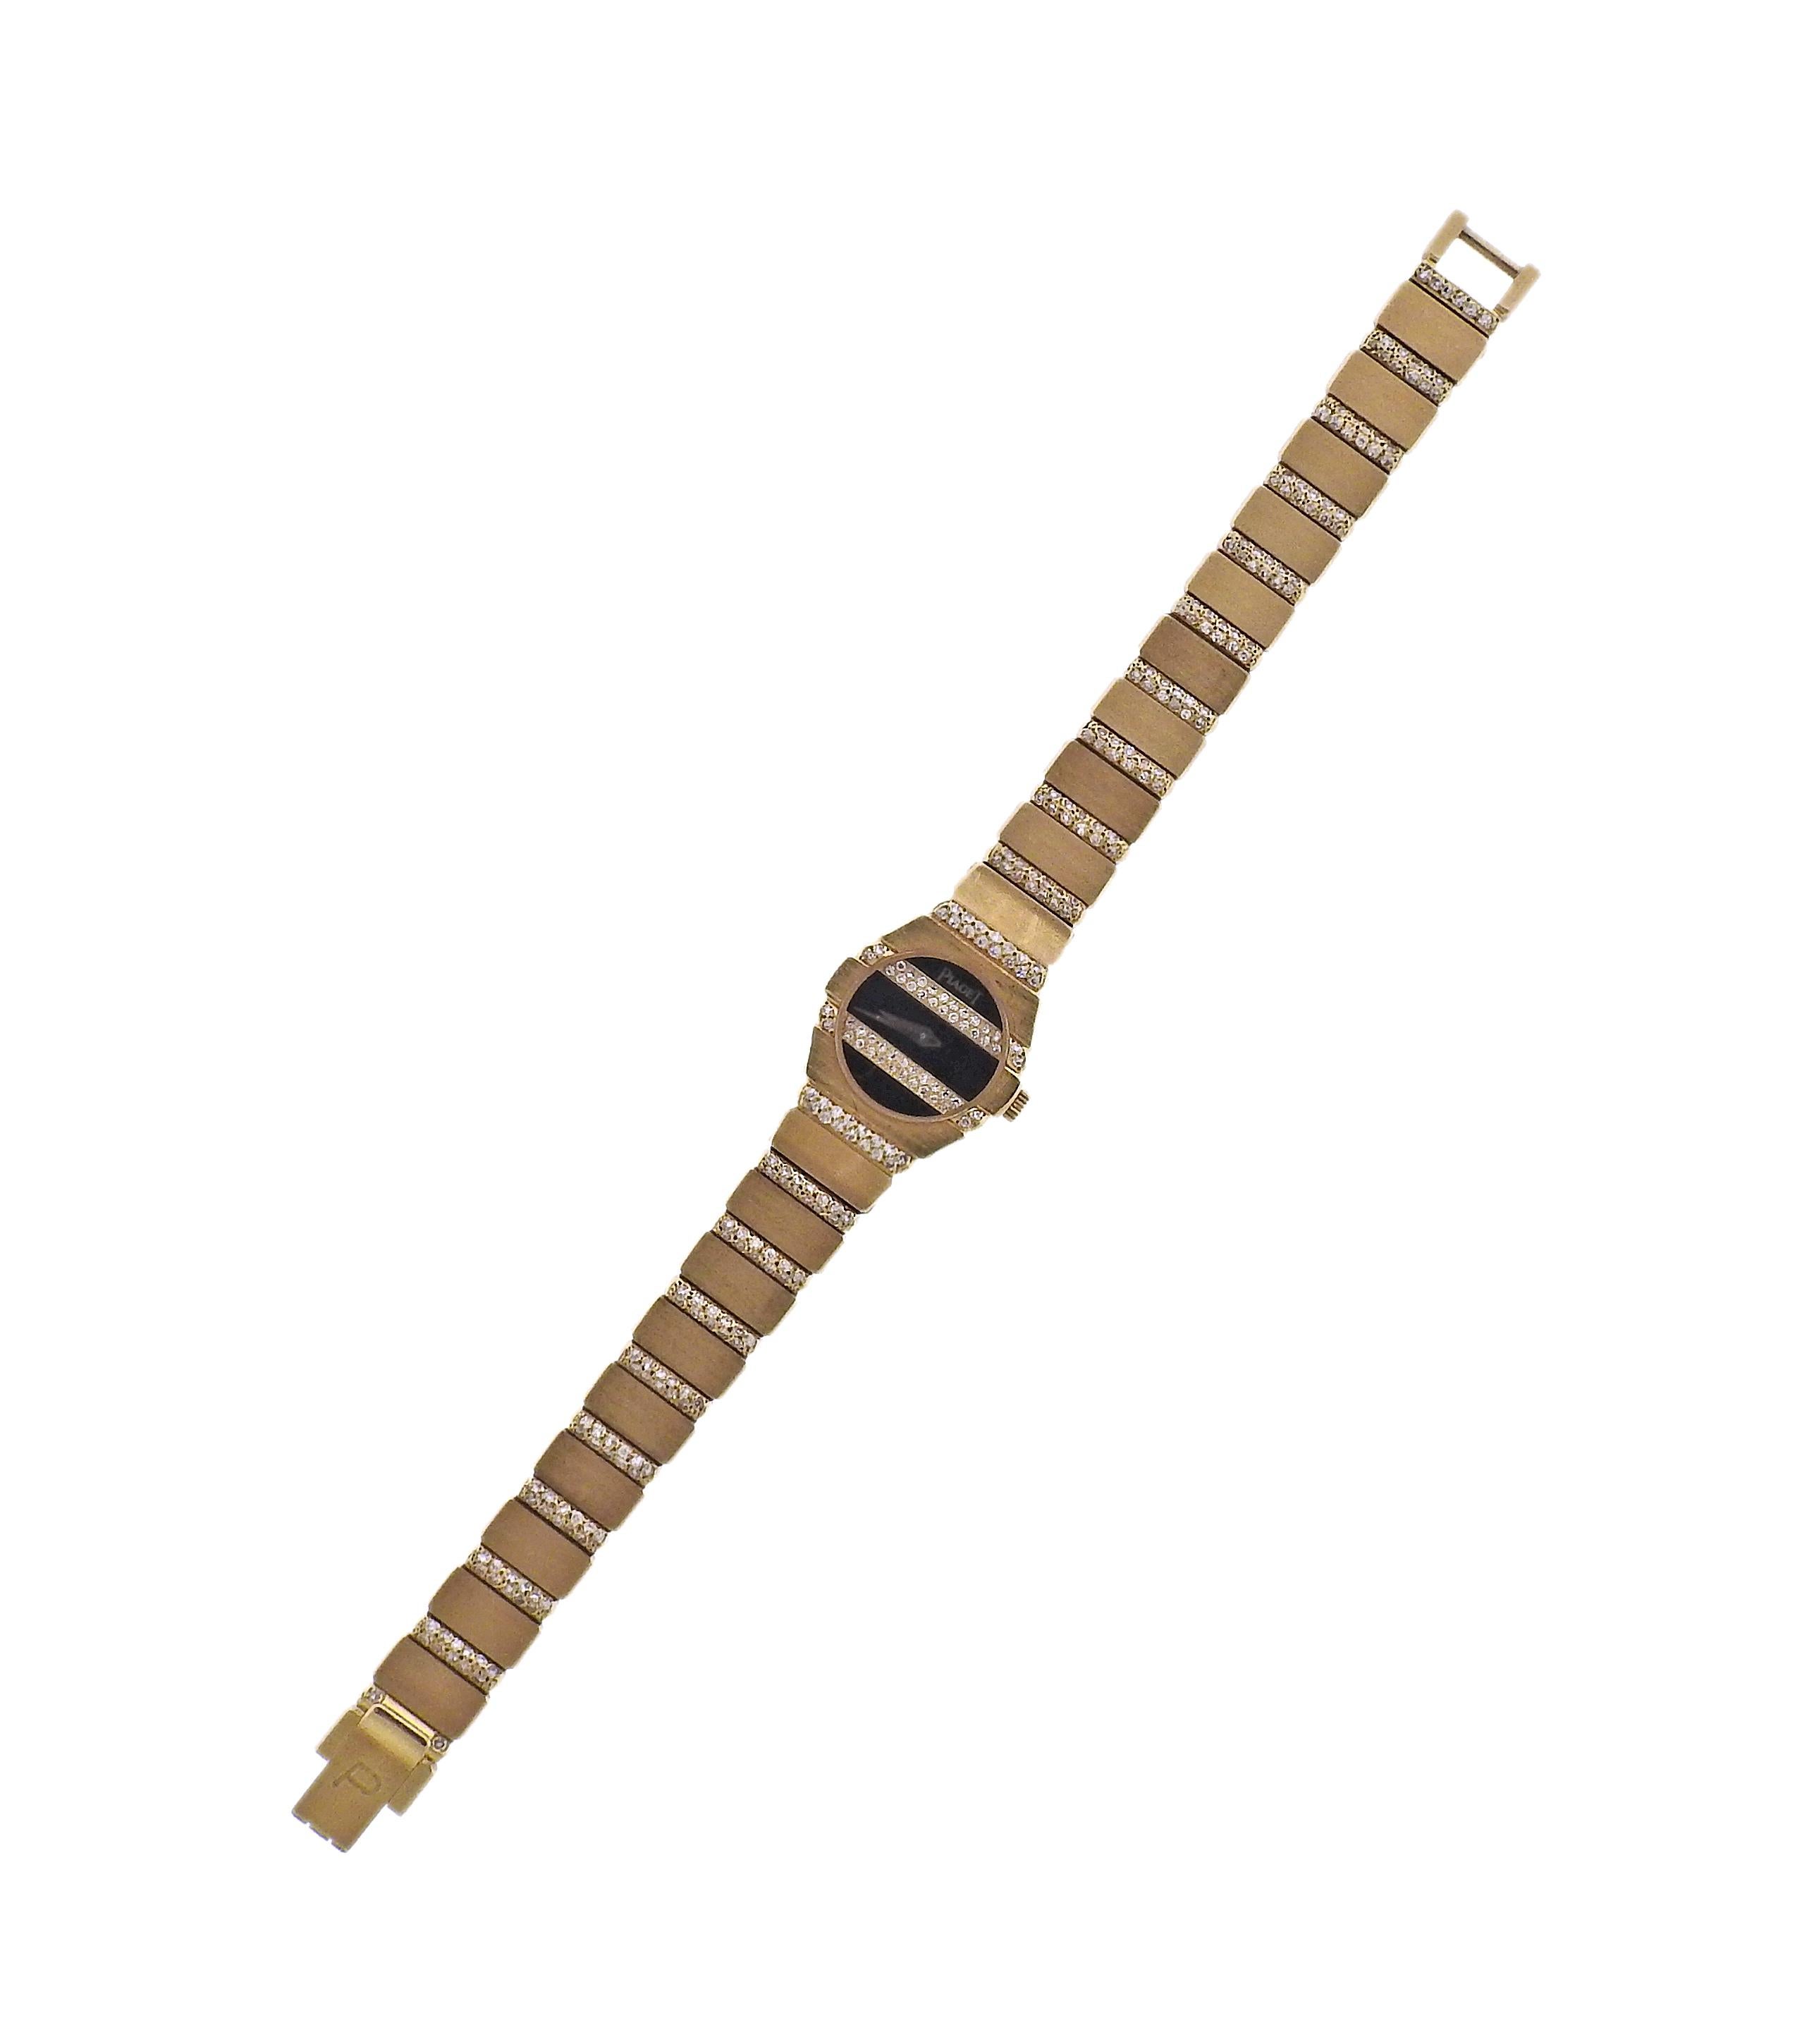 18k gold classic Polo watch by Piaget, with approx. 1.30ctw in diamonds and onyx dial. Bracelet is 6 2/8